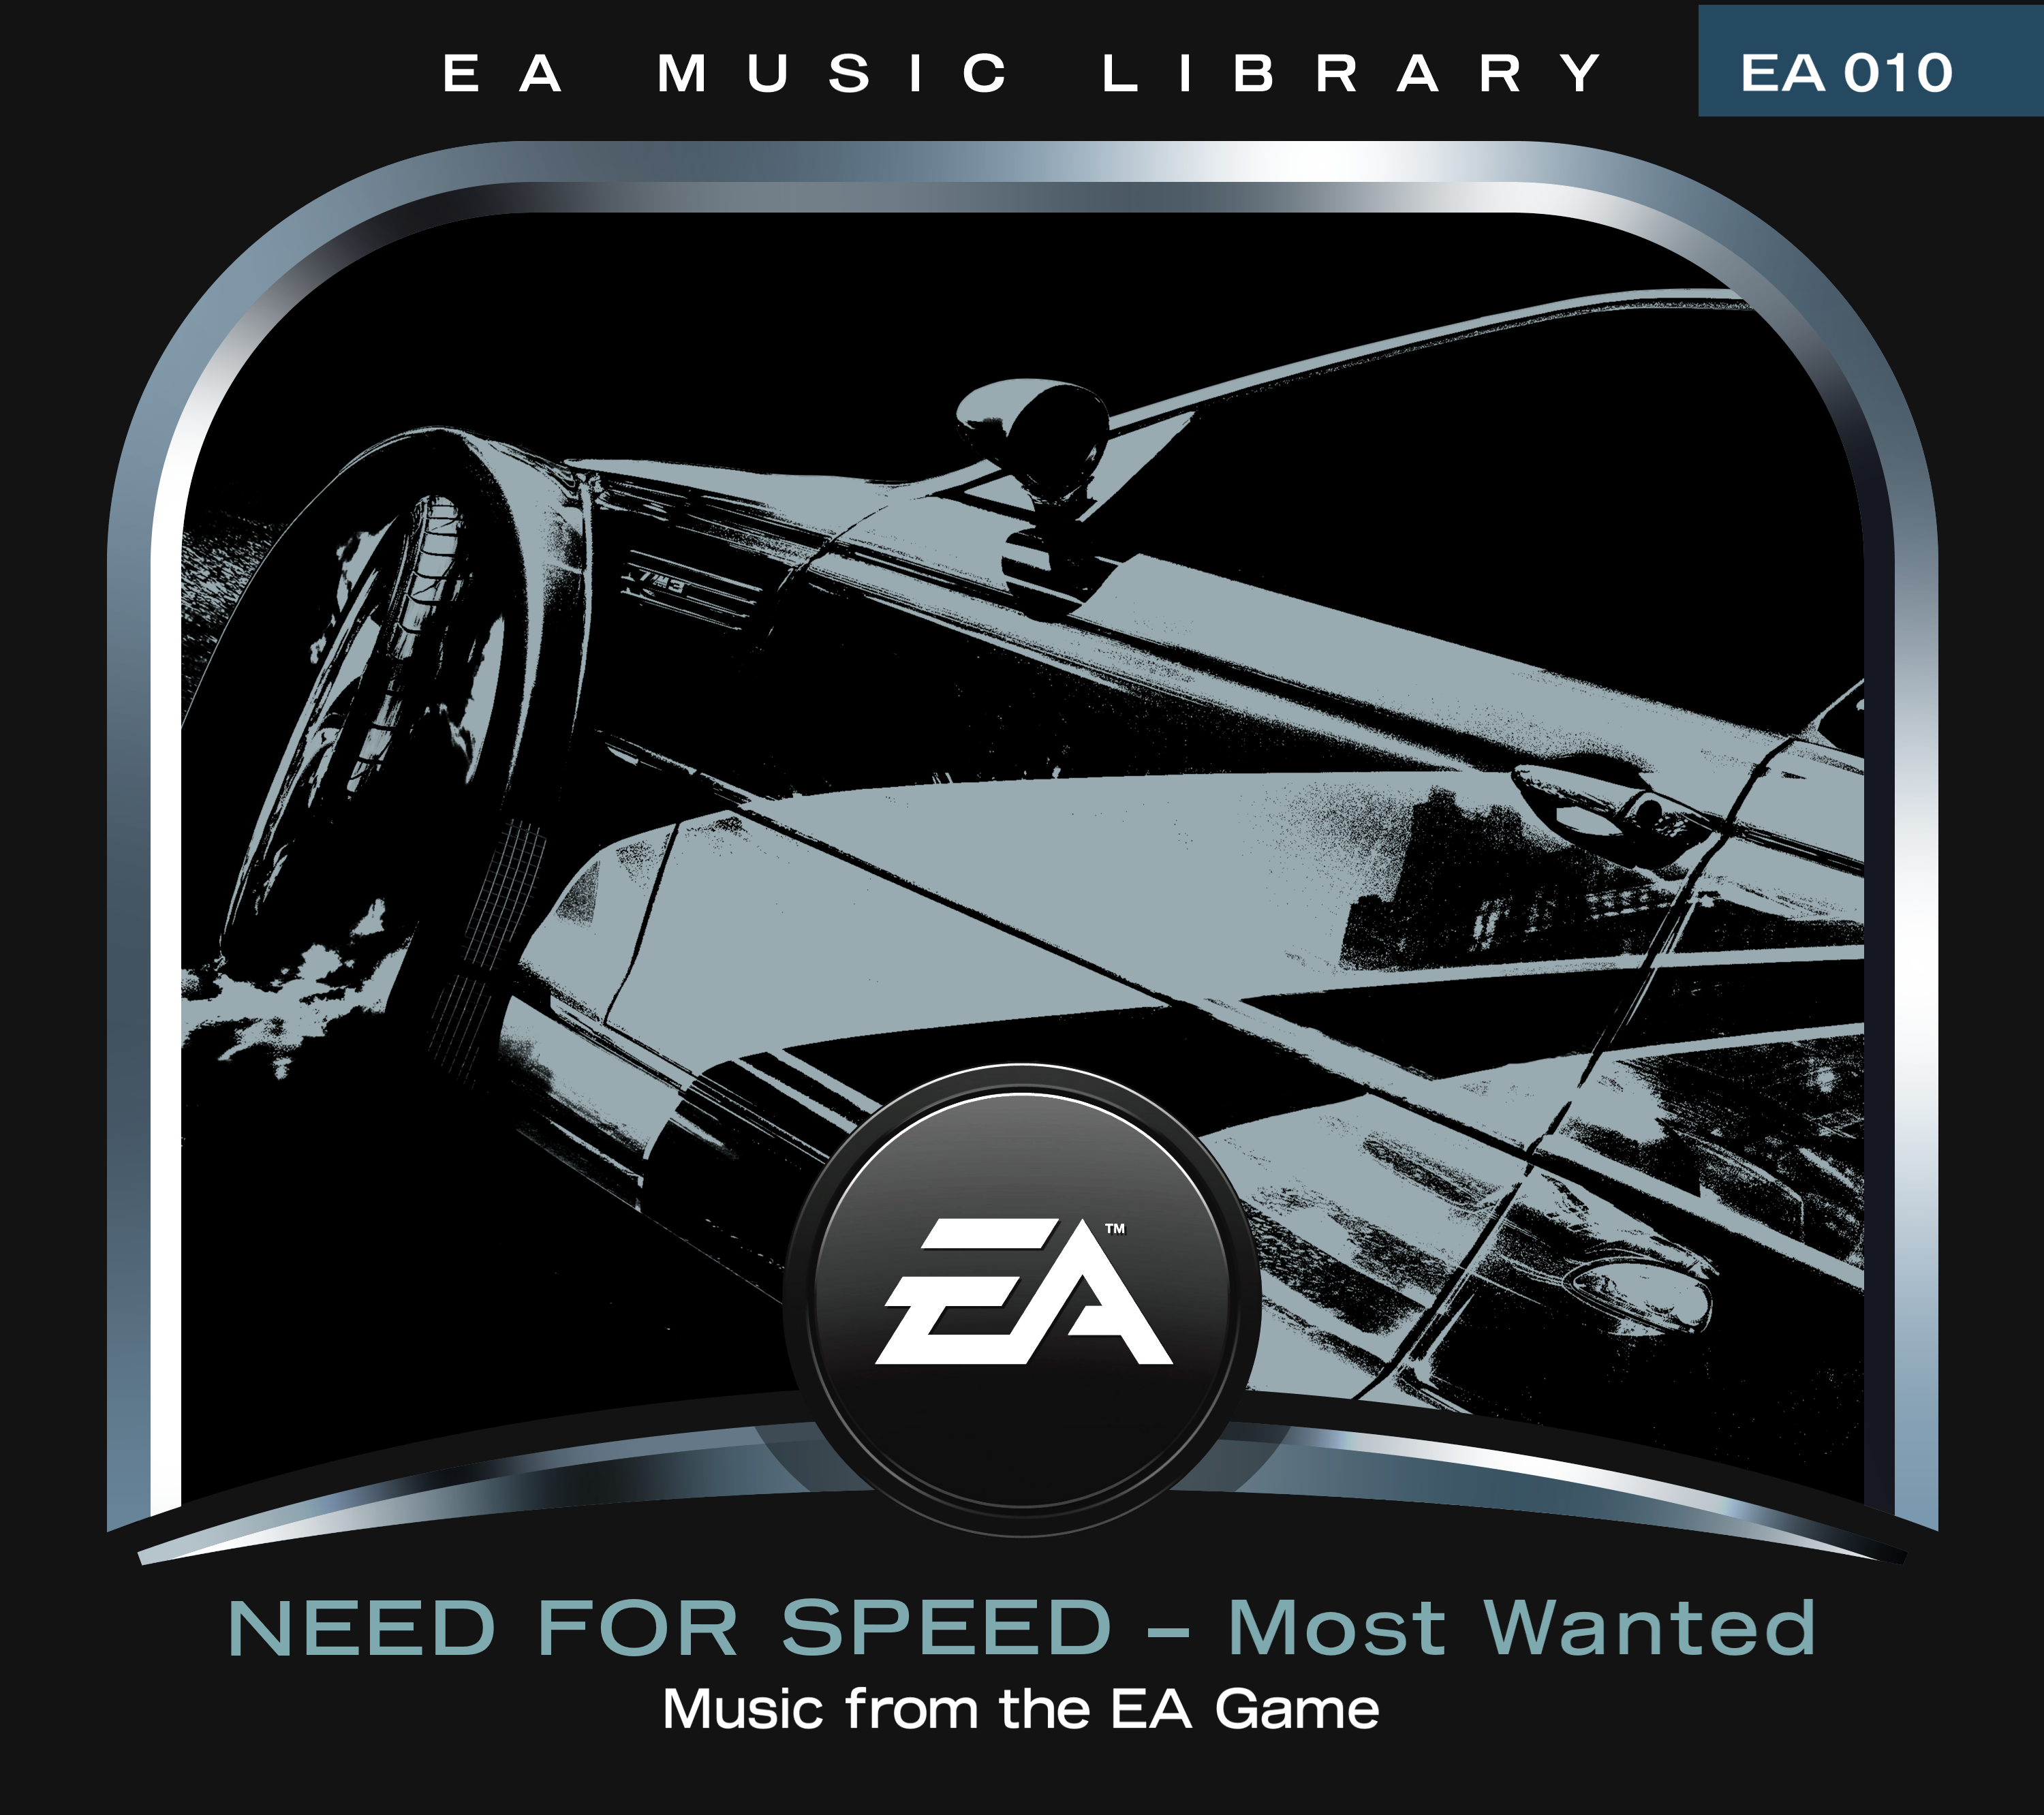 Nfs most soundtrack. Need for Speed most wanted диск. NFS most wanted обложка. Need for Speed most wanted саундтреки. NFS MW OST.